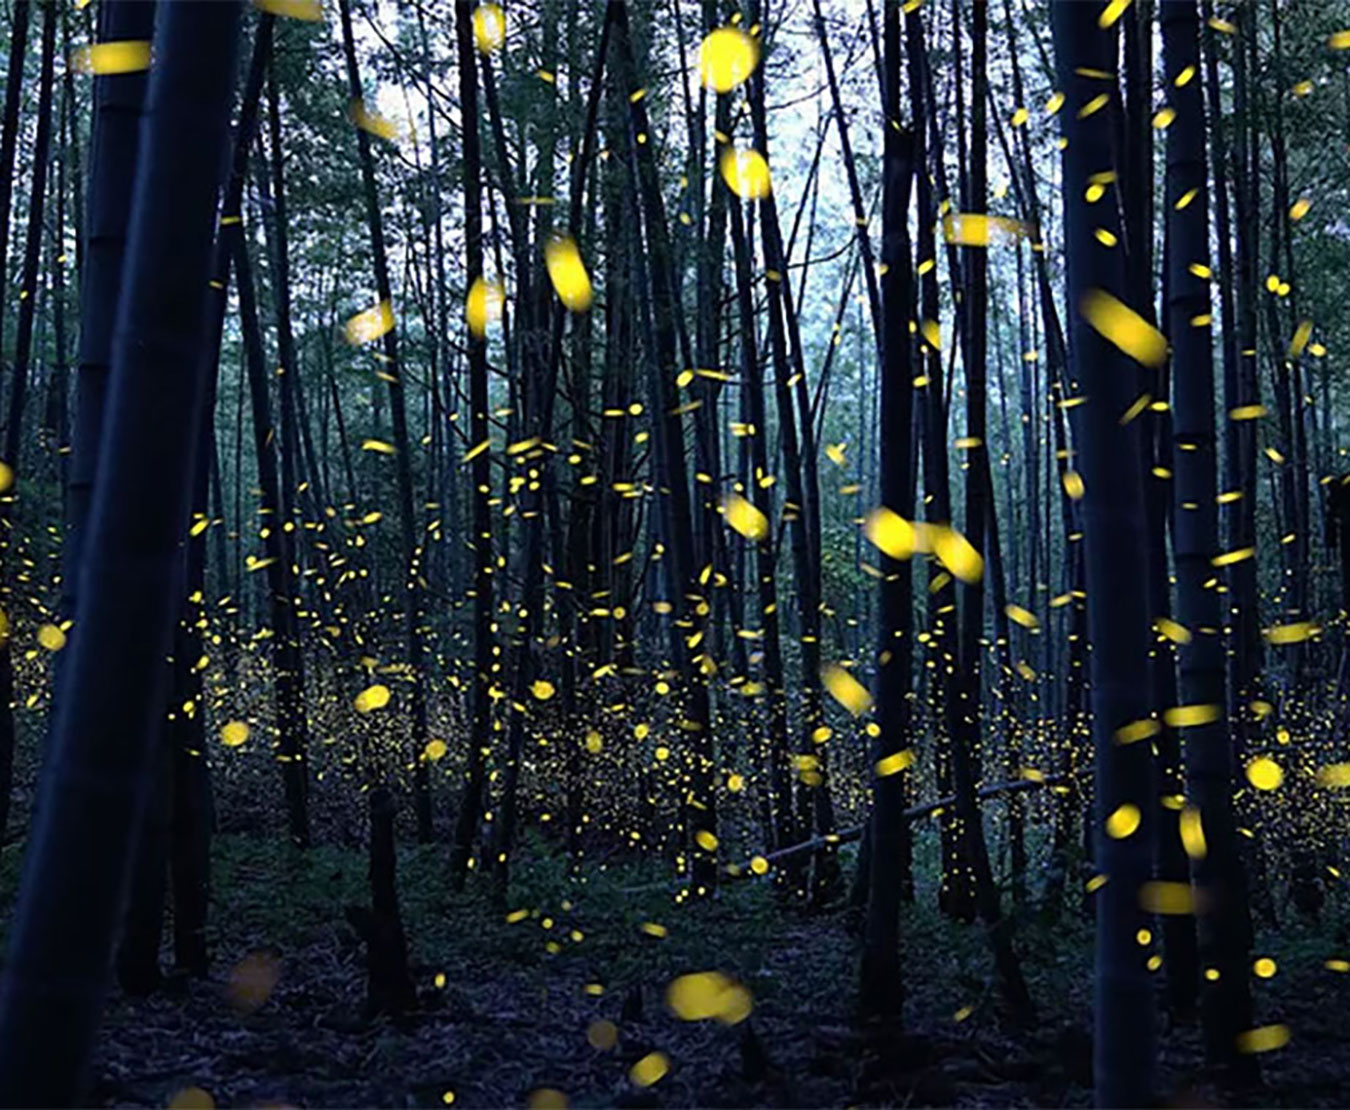 image shows fireflies or lightning bugs lighting up a dim forest